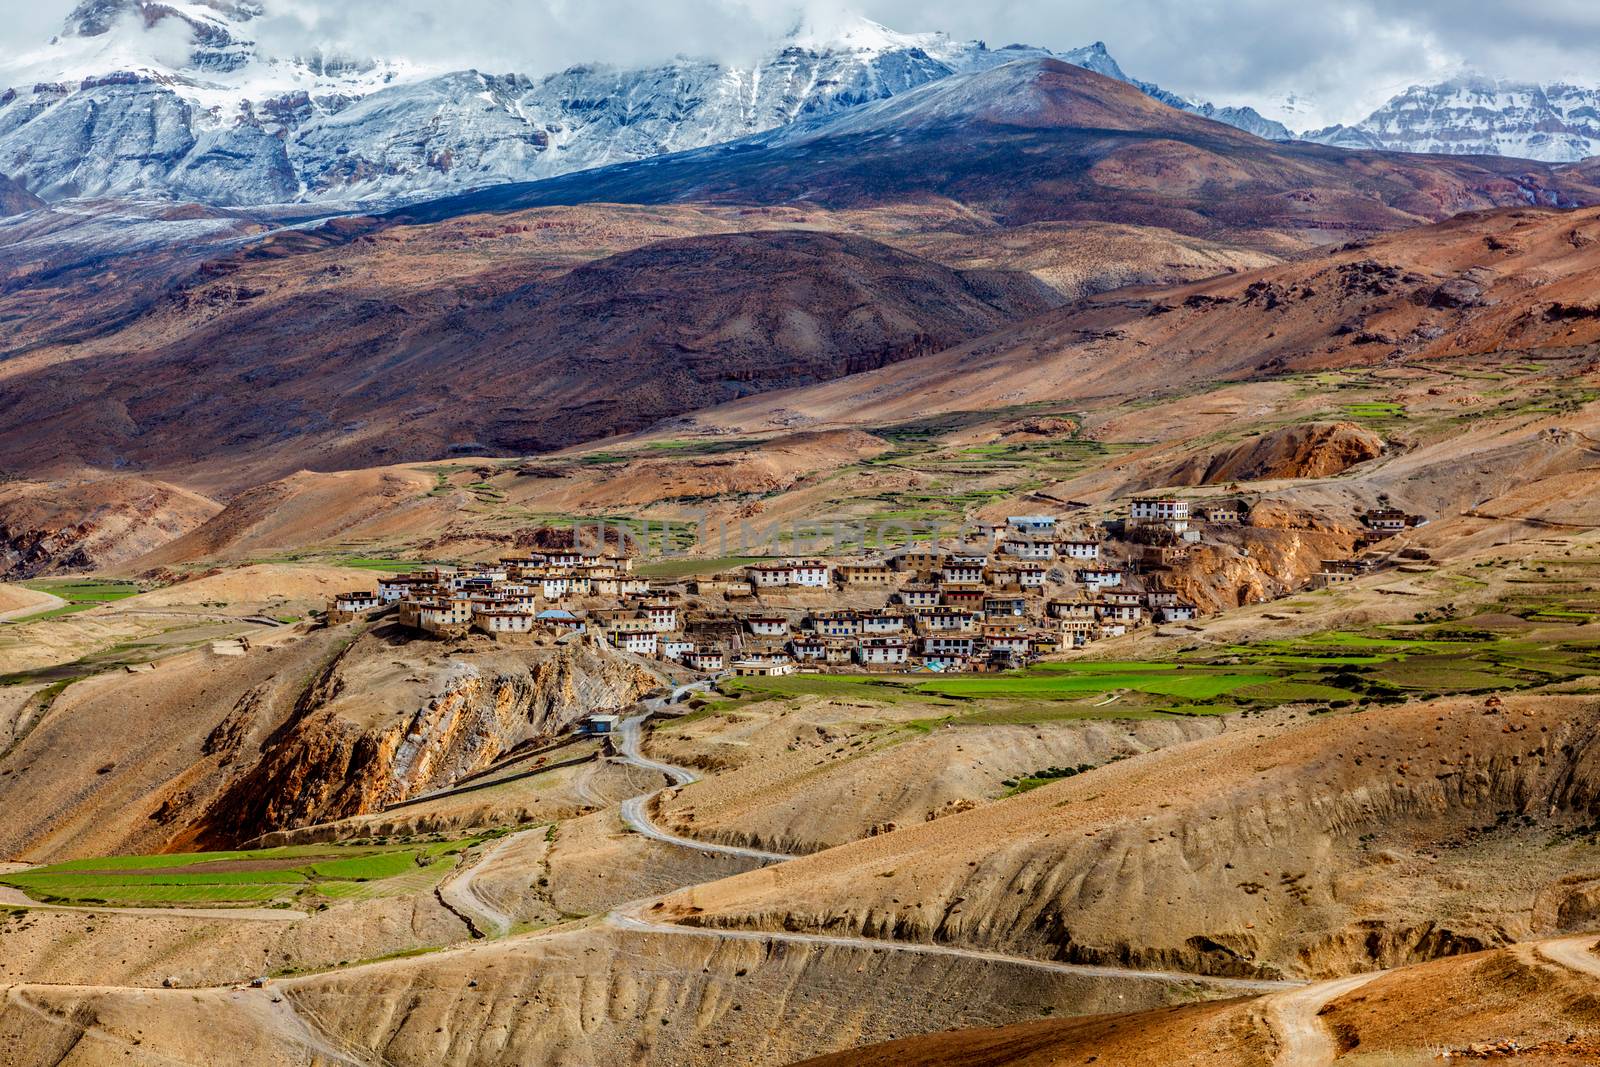 Kibber village in Himalayas. Lies in a narrow valley on the summit of a limestone rock. Elevation 4270 m above sea level. Highest populated village in the world. Spiti Valley, Himachal Pradesh, India